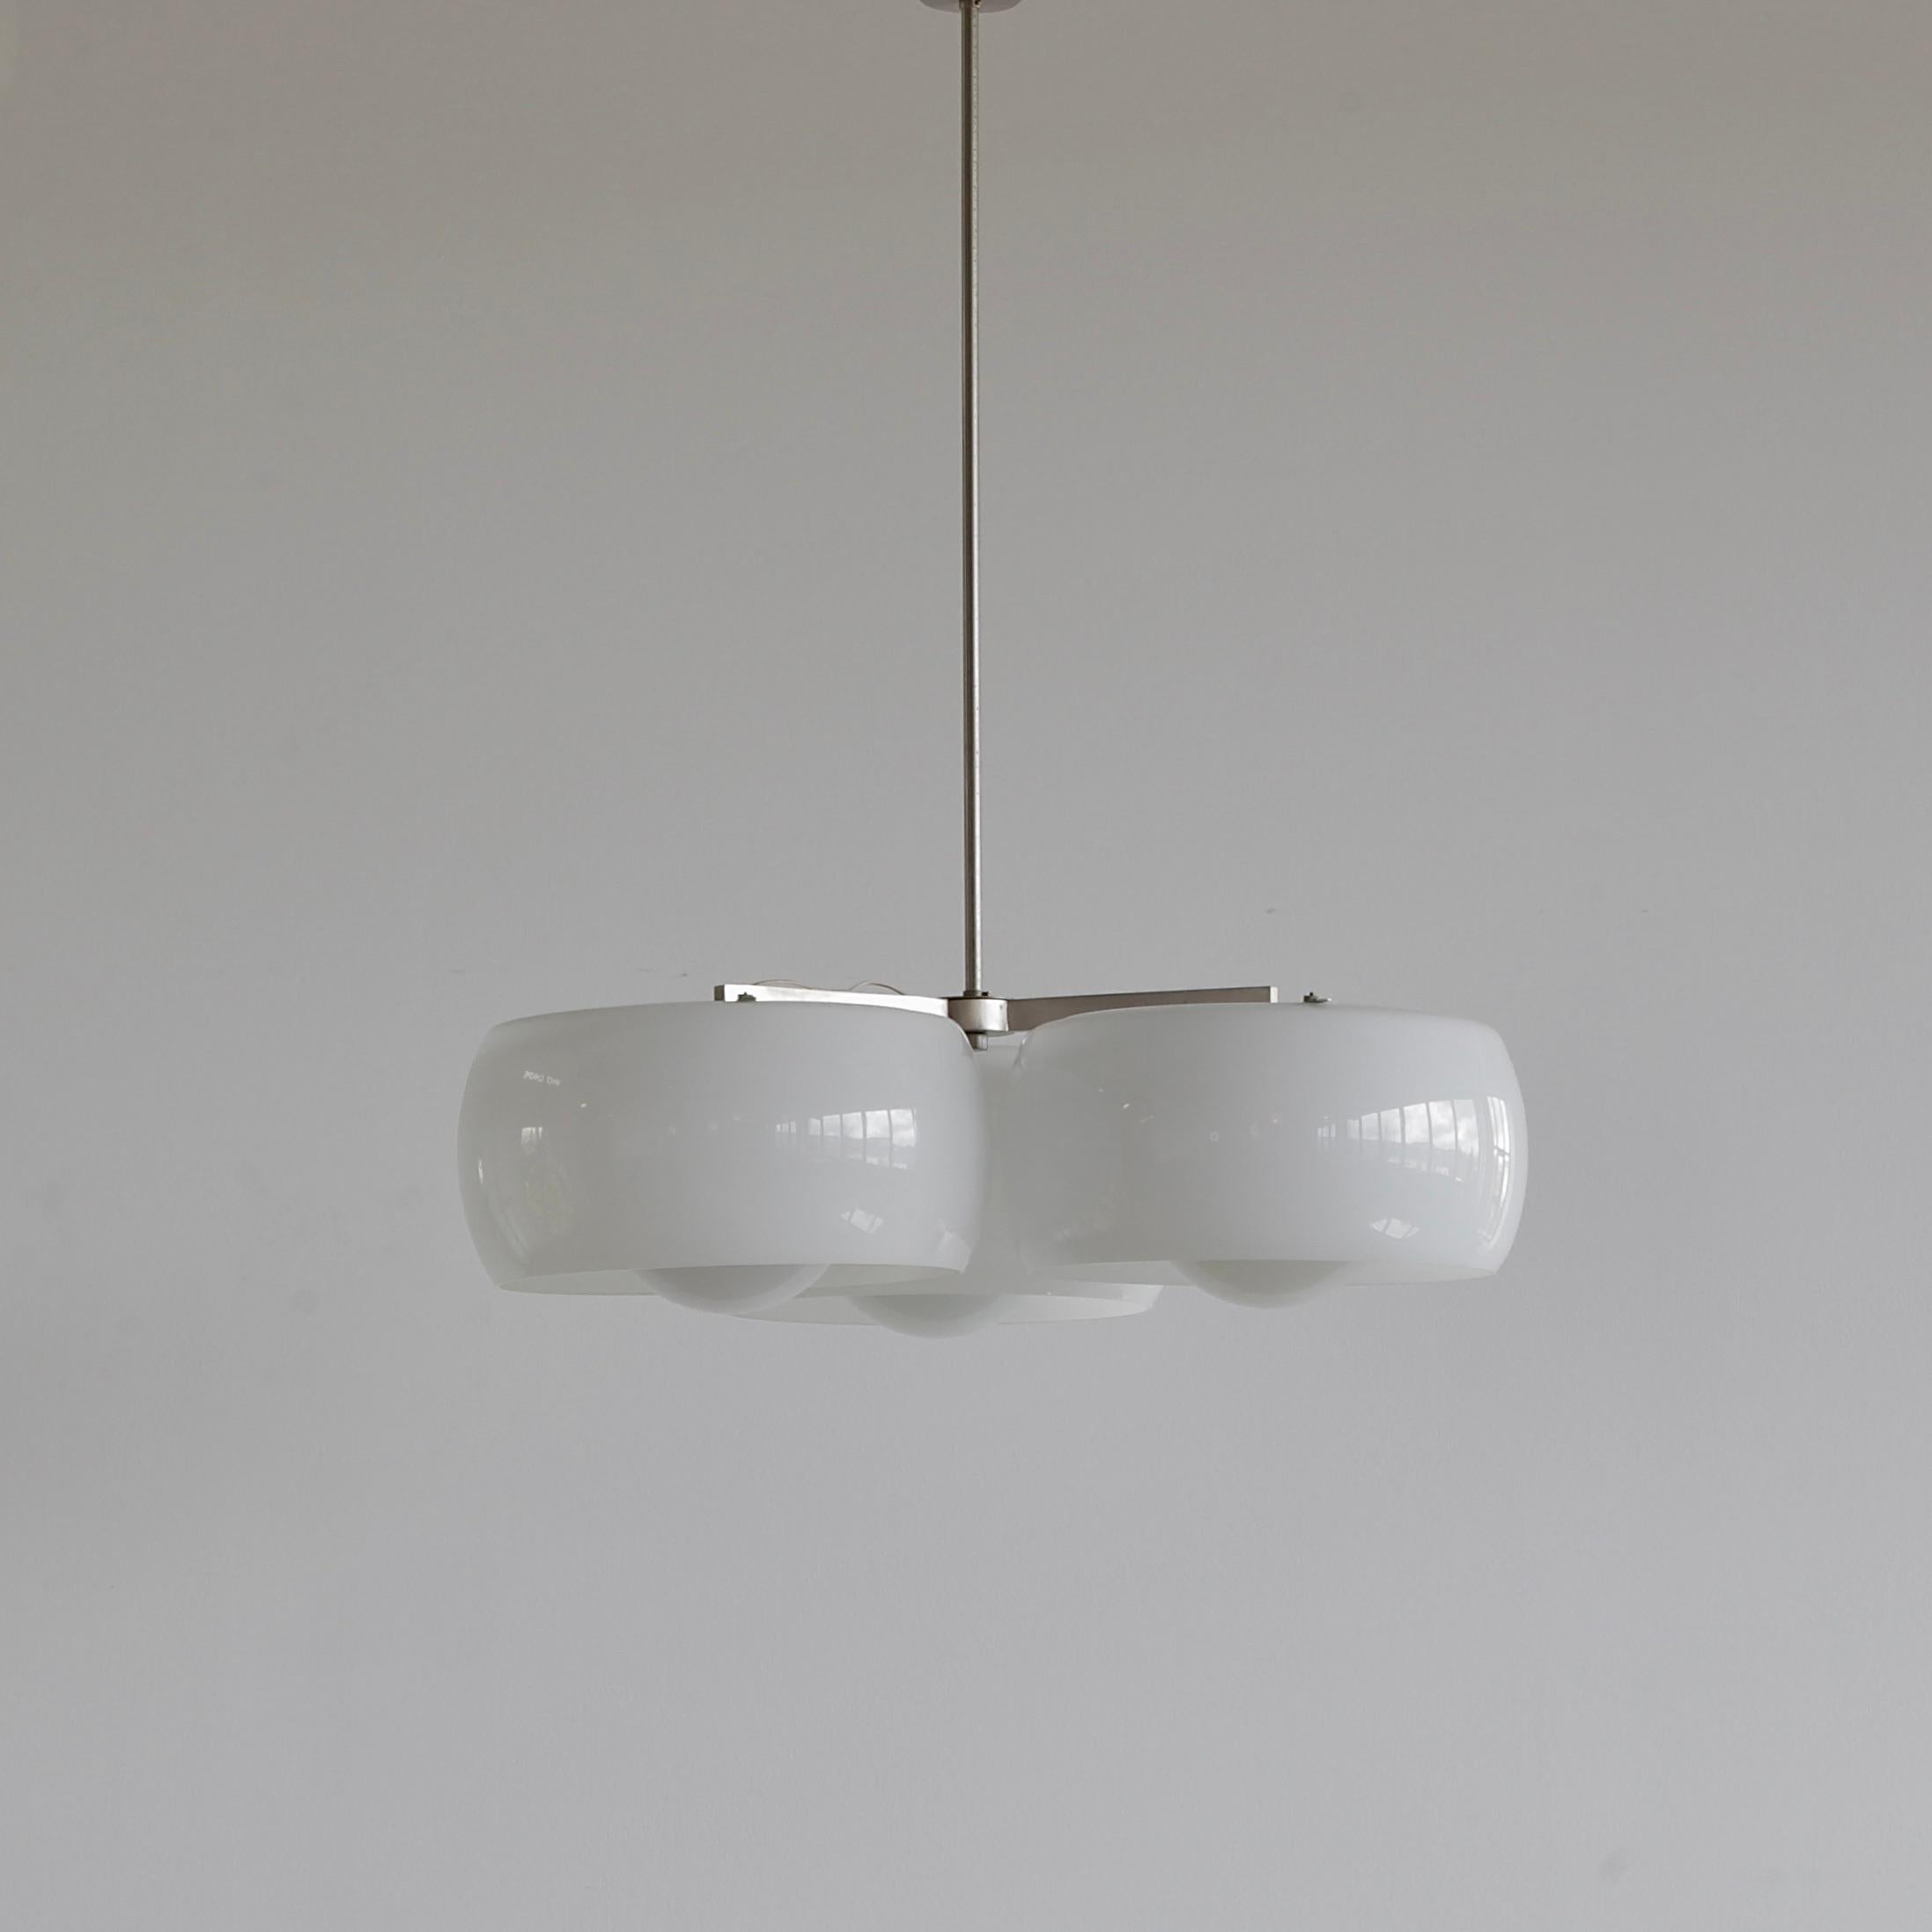 Mid-20th Century Ceiling Lamp Designed by Vico Magistretti for Artemide Italy 1961